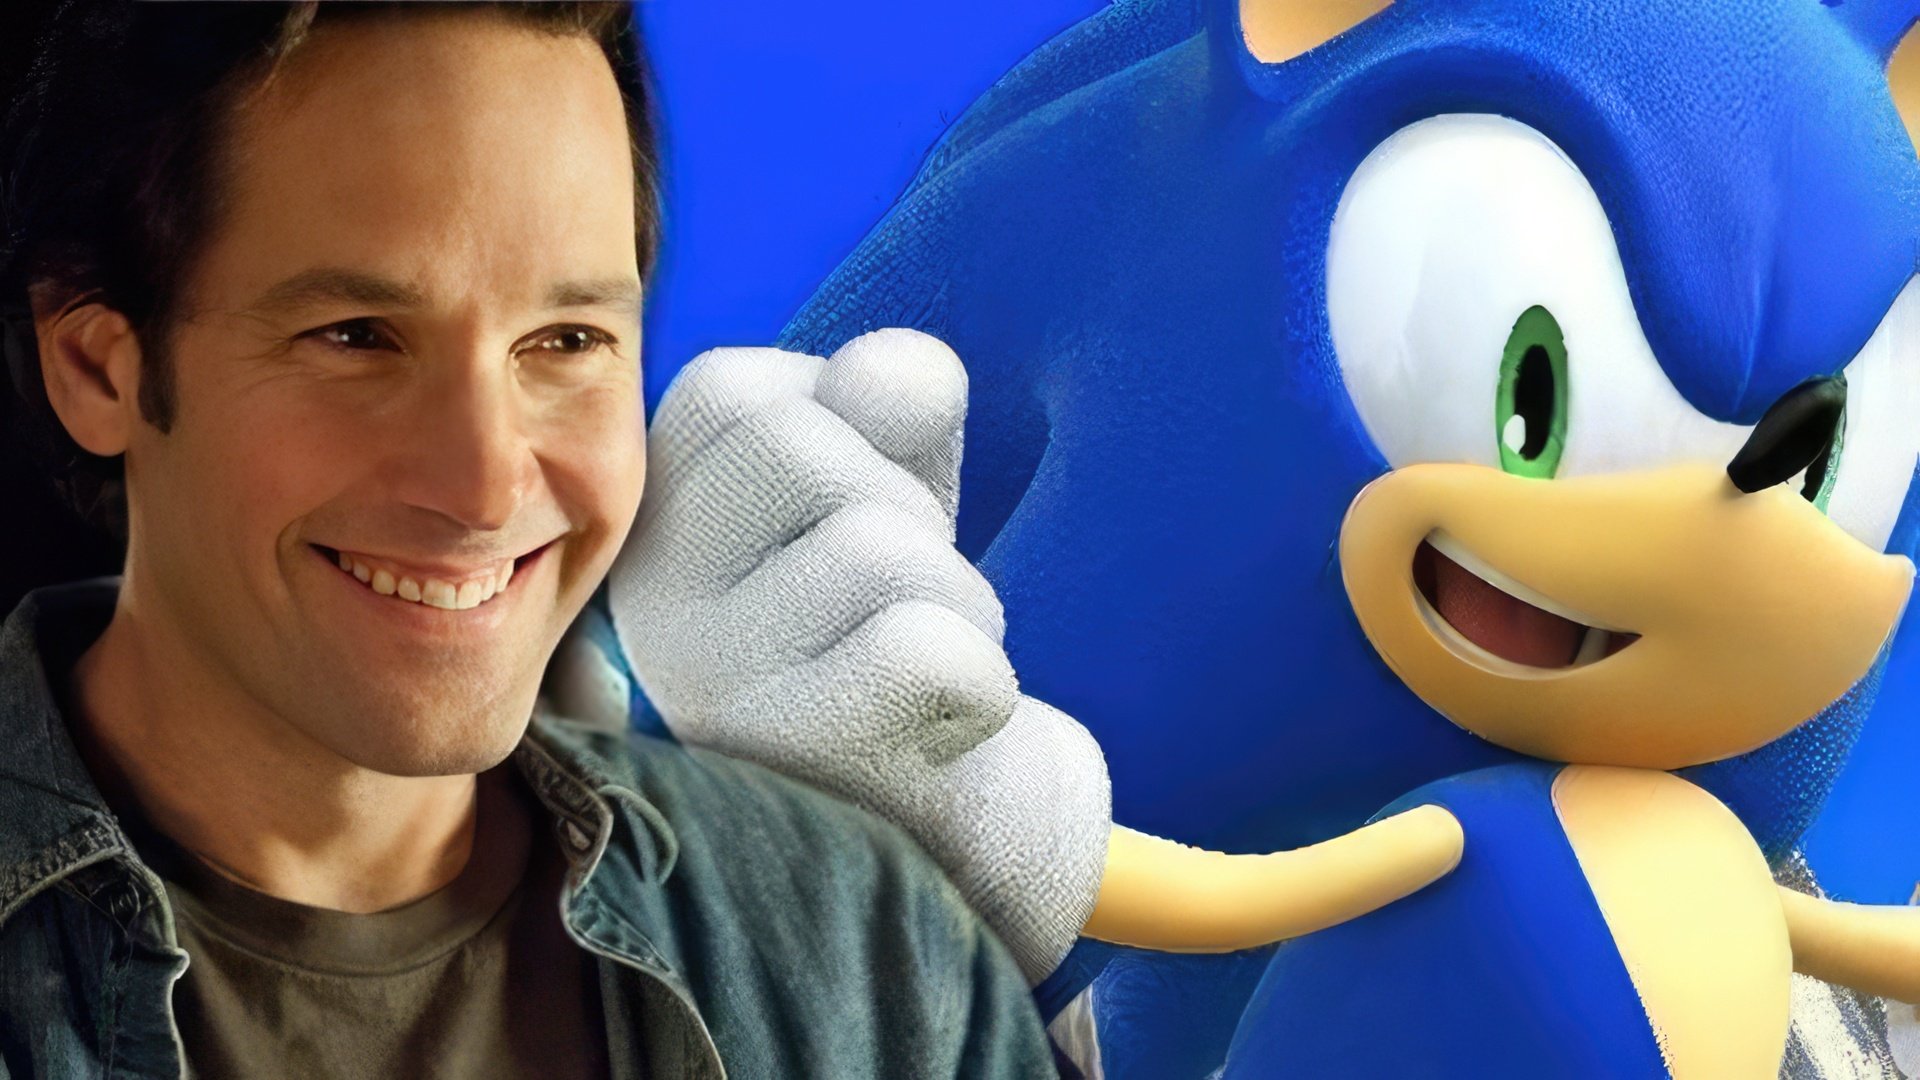 Paul Rudd voices cartoons and animated series